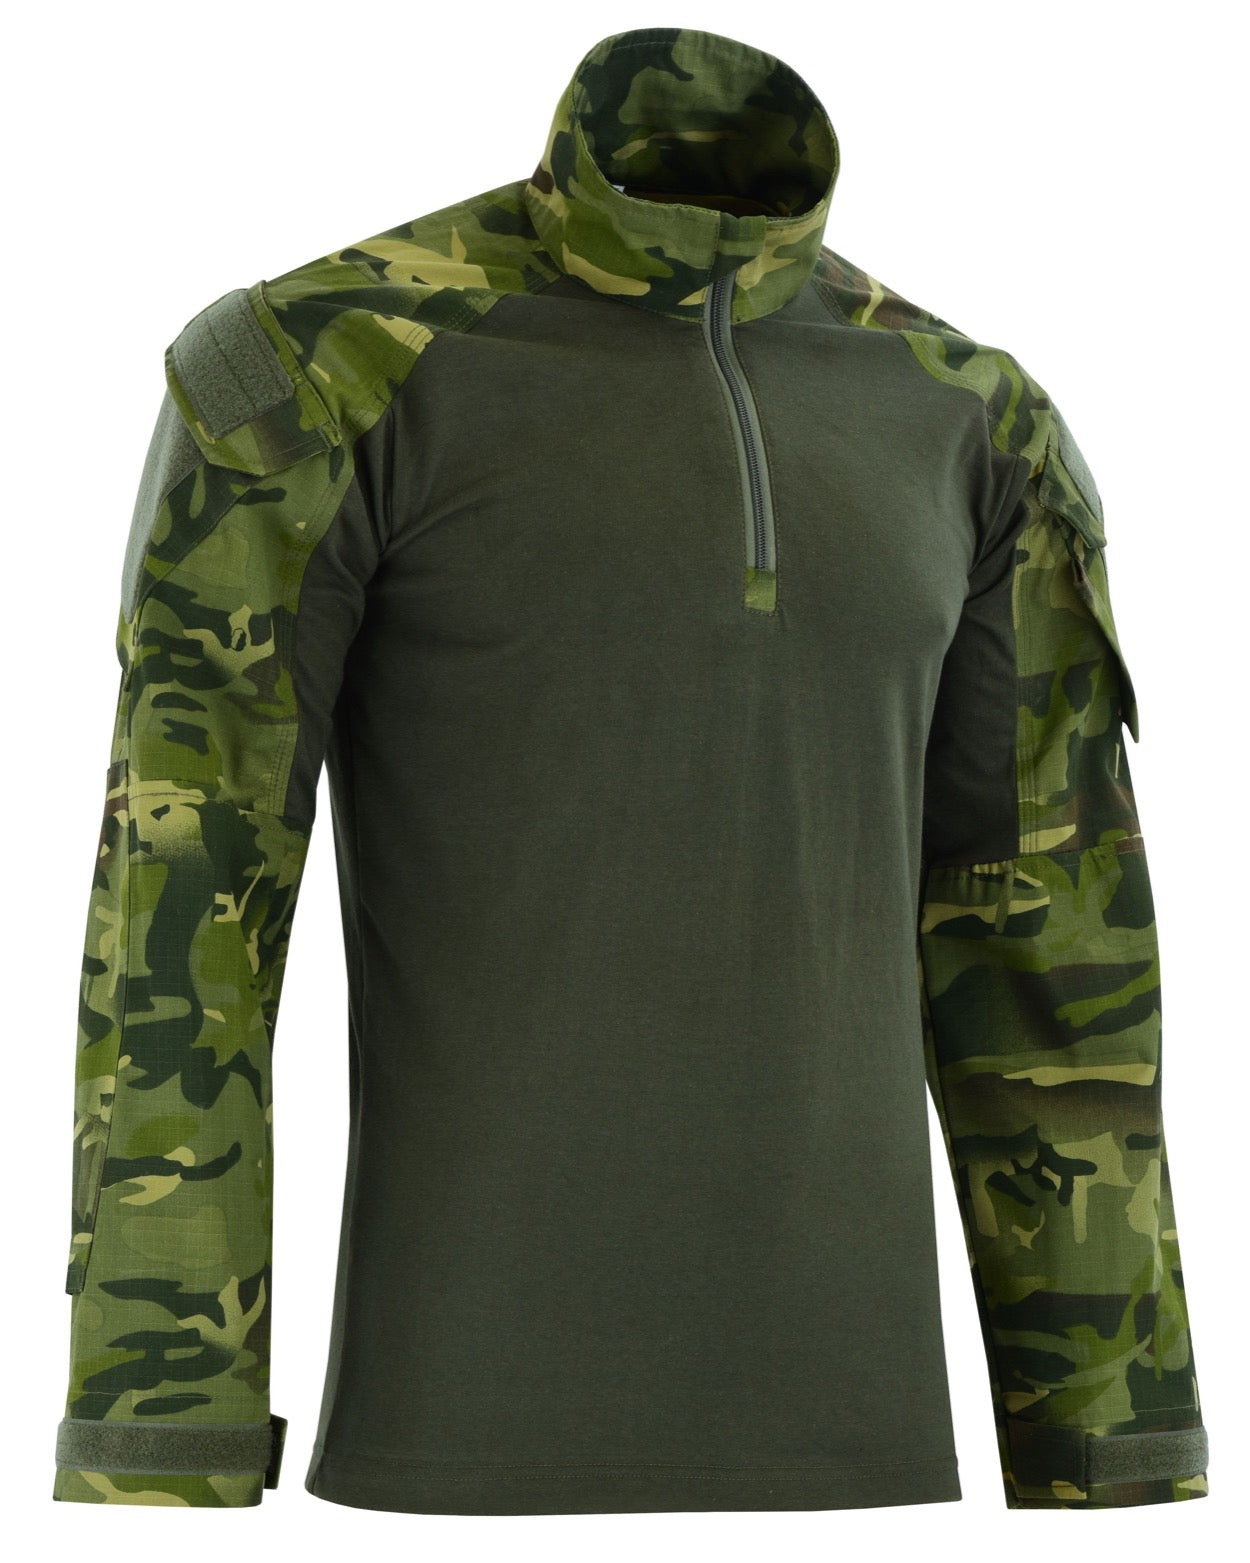 Tactical Zone HYBRID TACTICAL SHIRT IS A PERFECT COMBAT SHIRT Colour  UTP-Temperate front